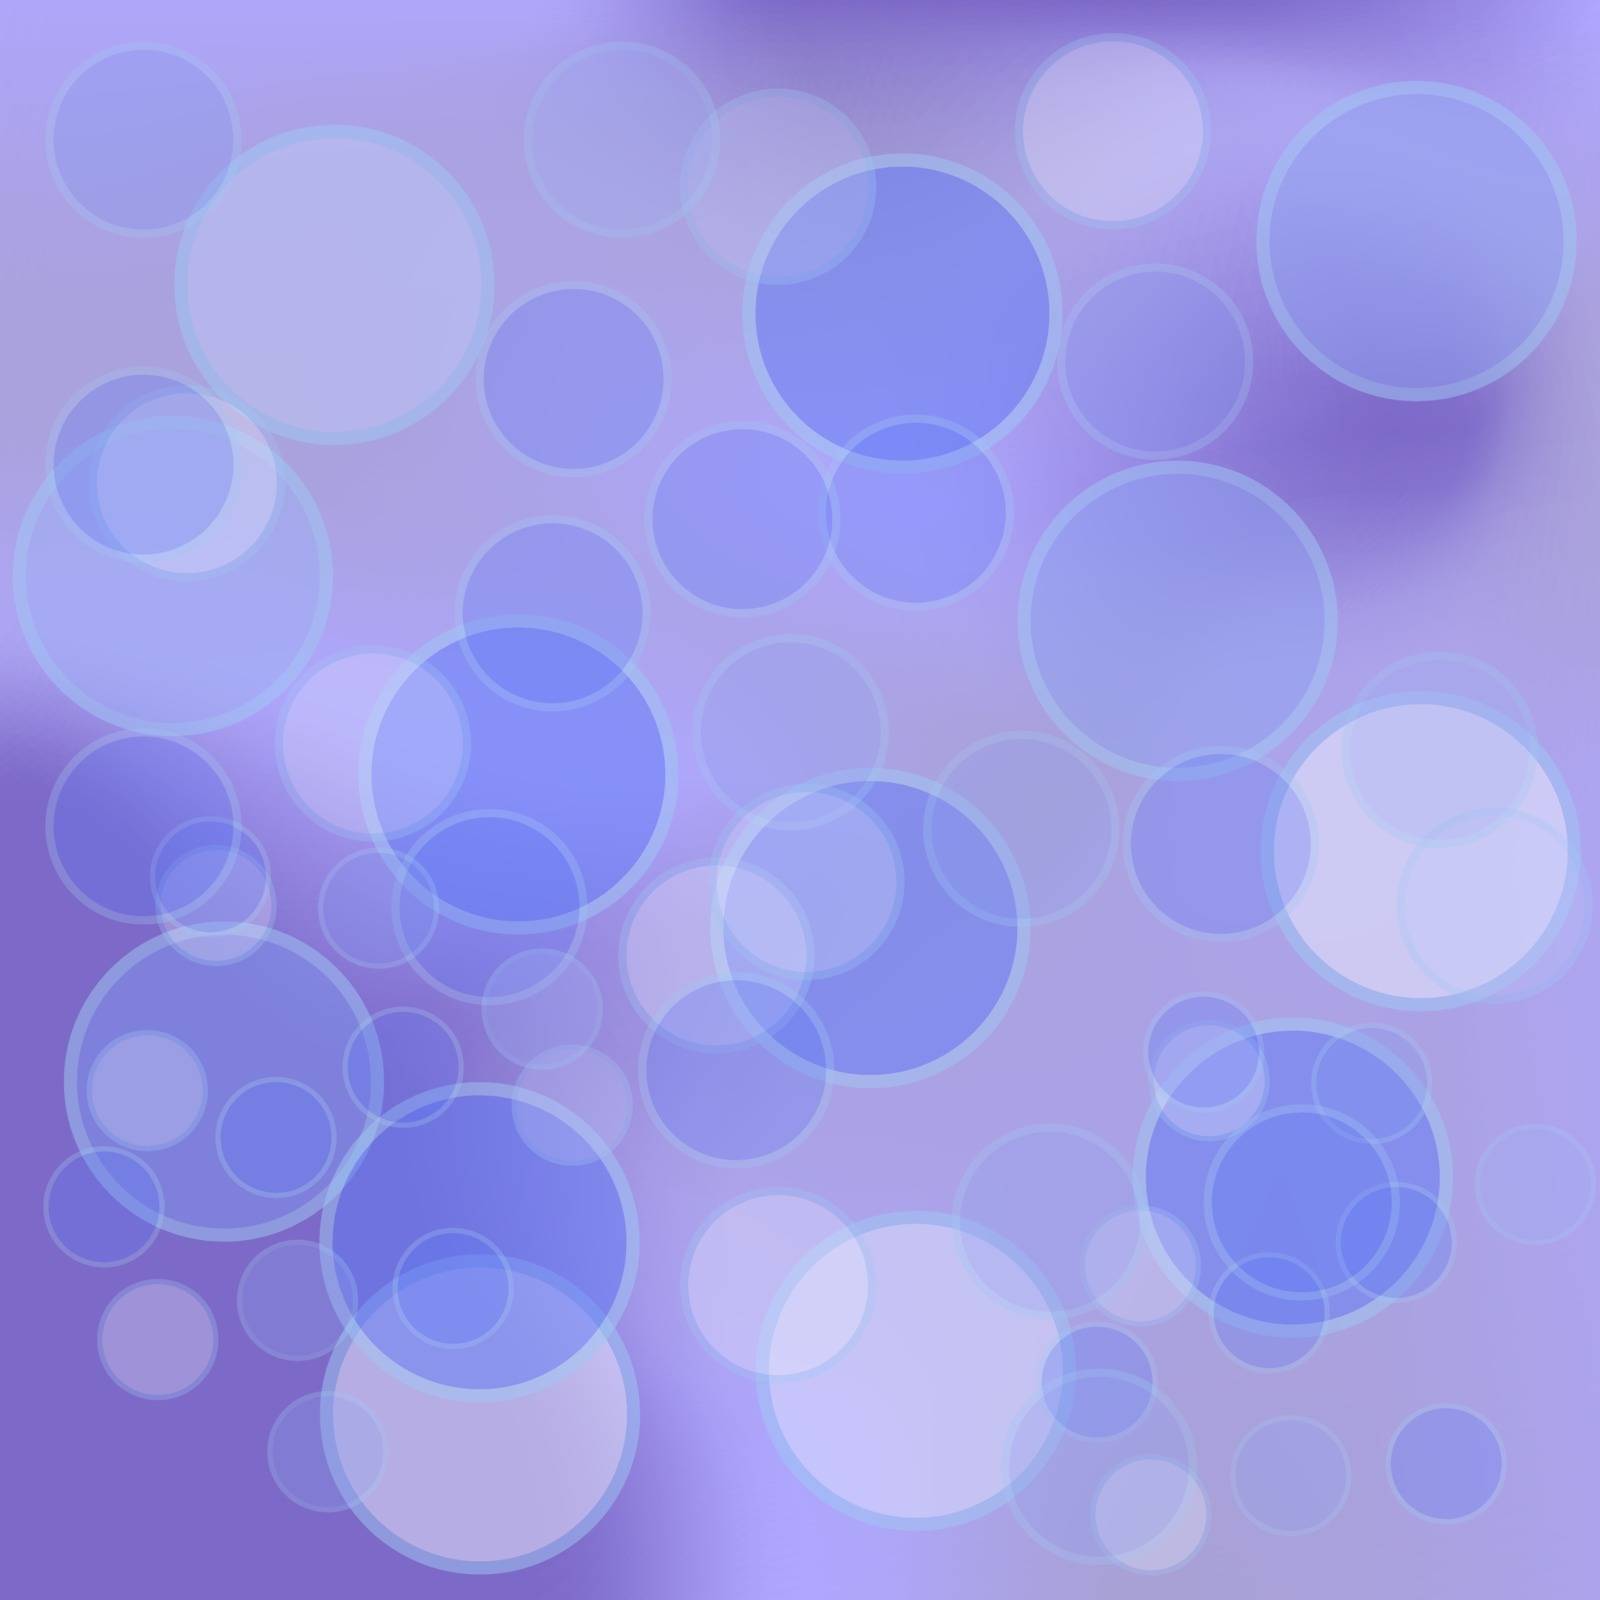 Abstract Blue Circle Background for Your Design